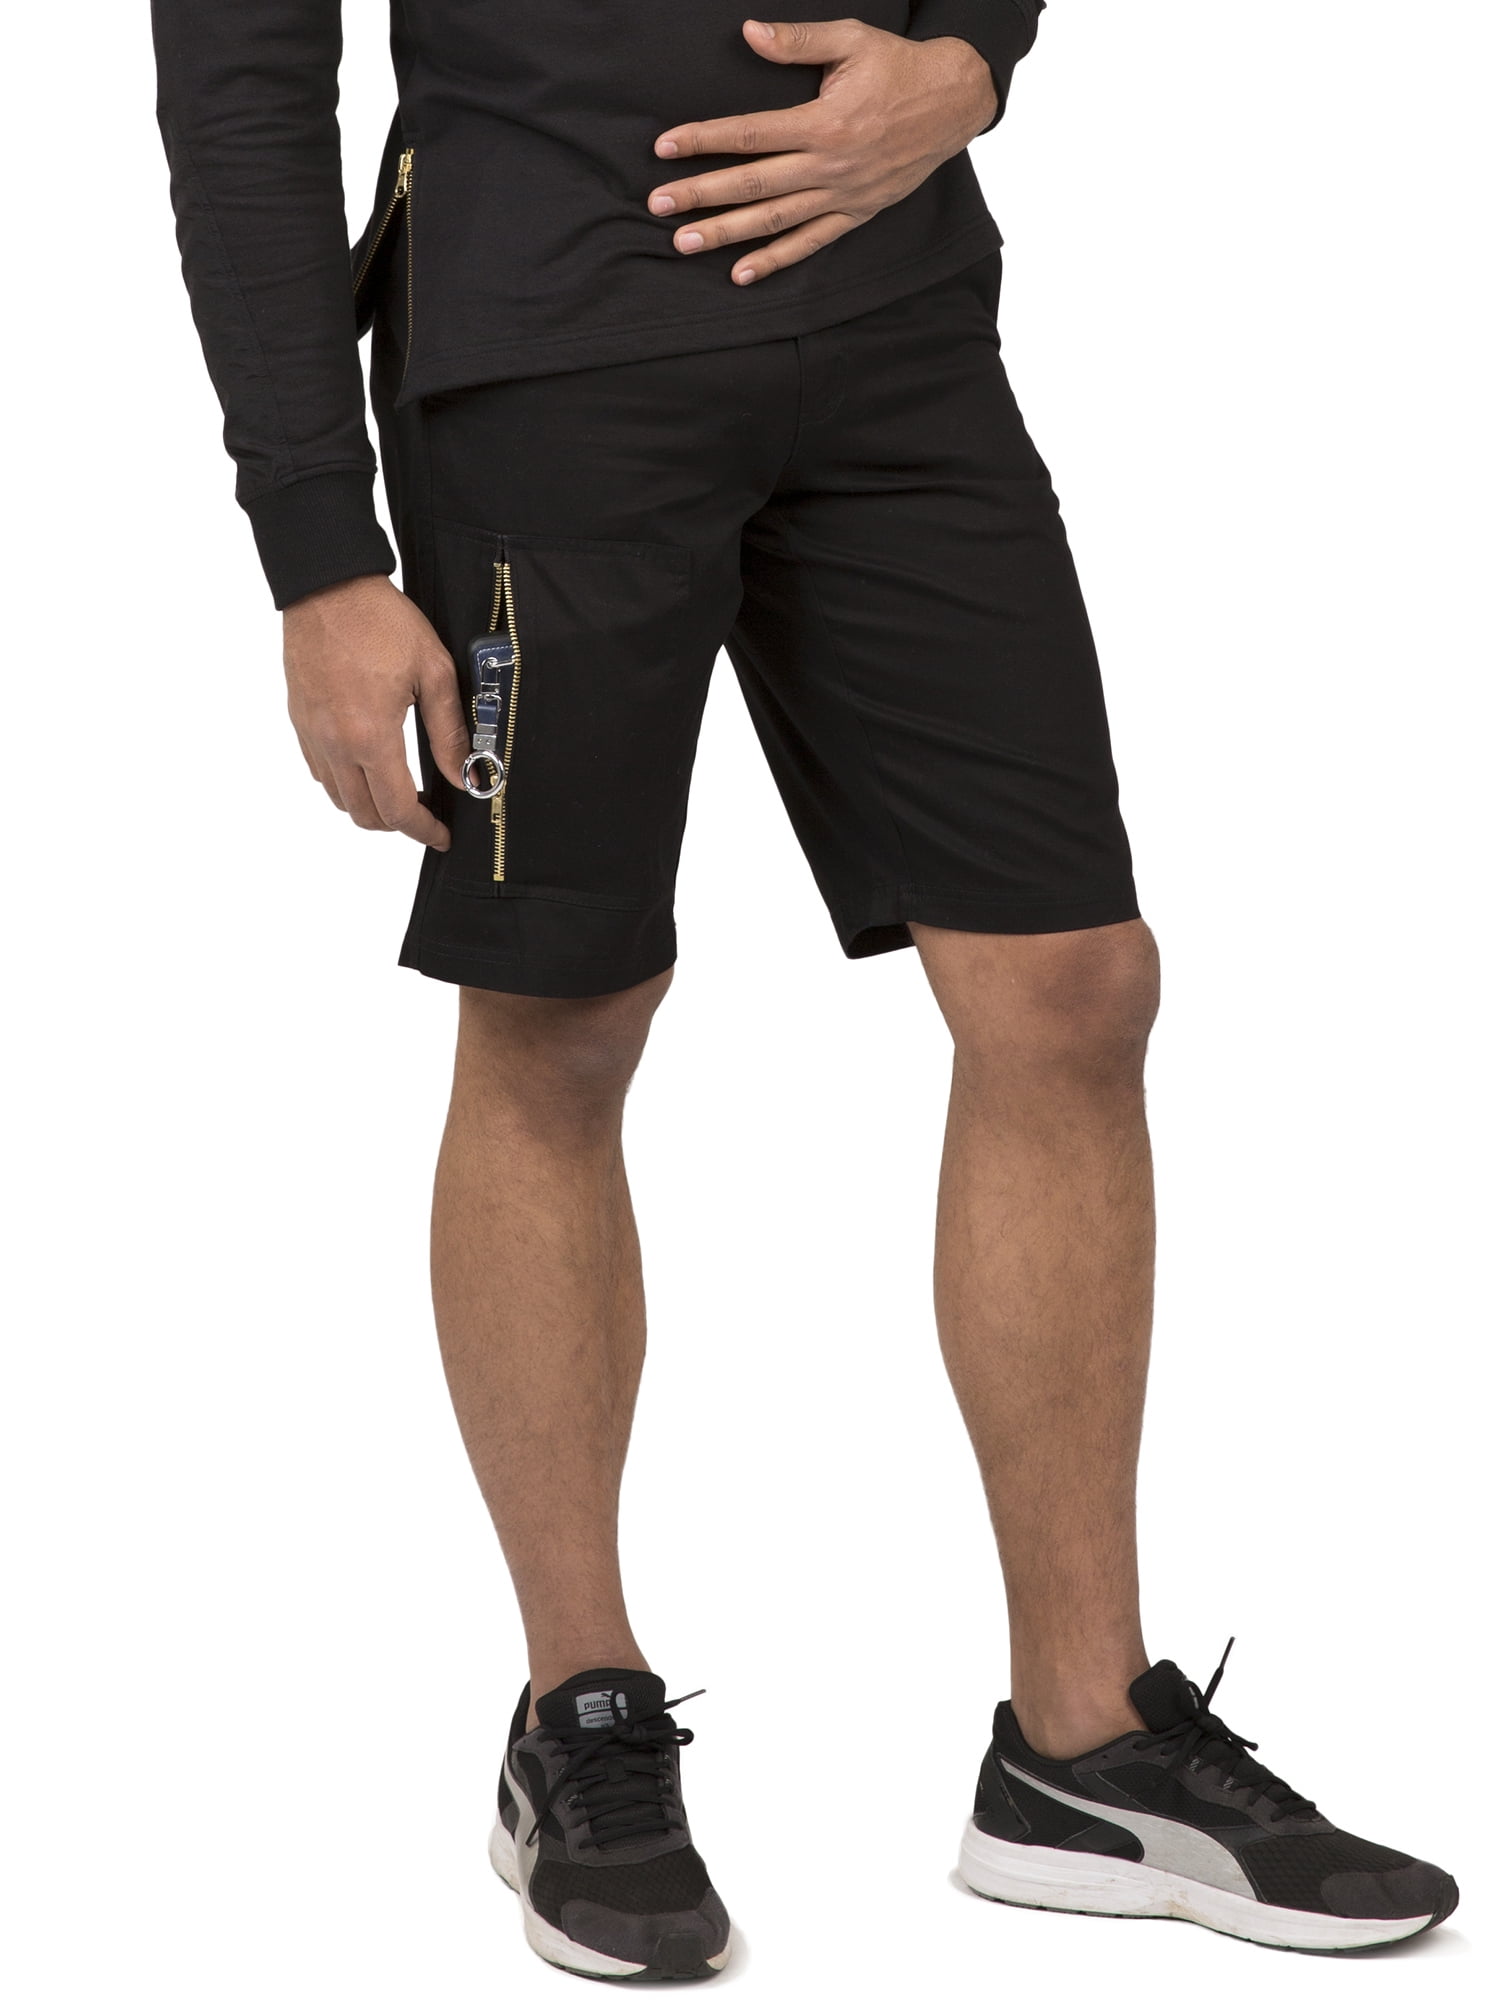 28-399 15689 Charcoal  Shorts Game Men's Multipocket Cargo Workwear Shorts 